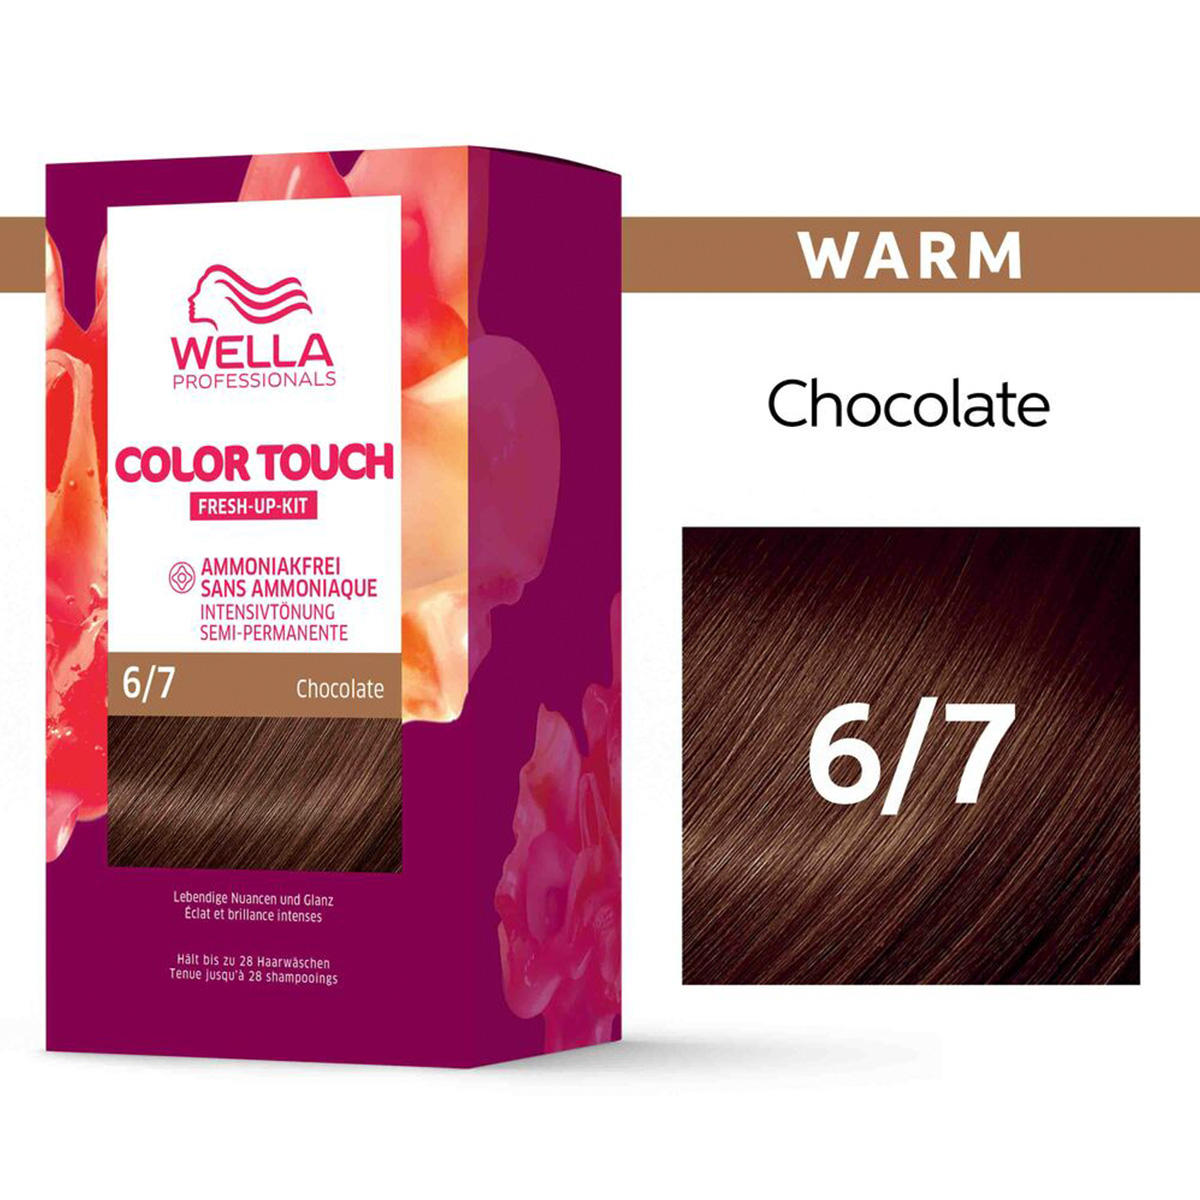 Wella Color Touch Fresh-Up-Kit 6/7 Castaño rubio oscuro 130 ml - 2